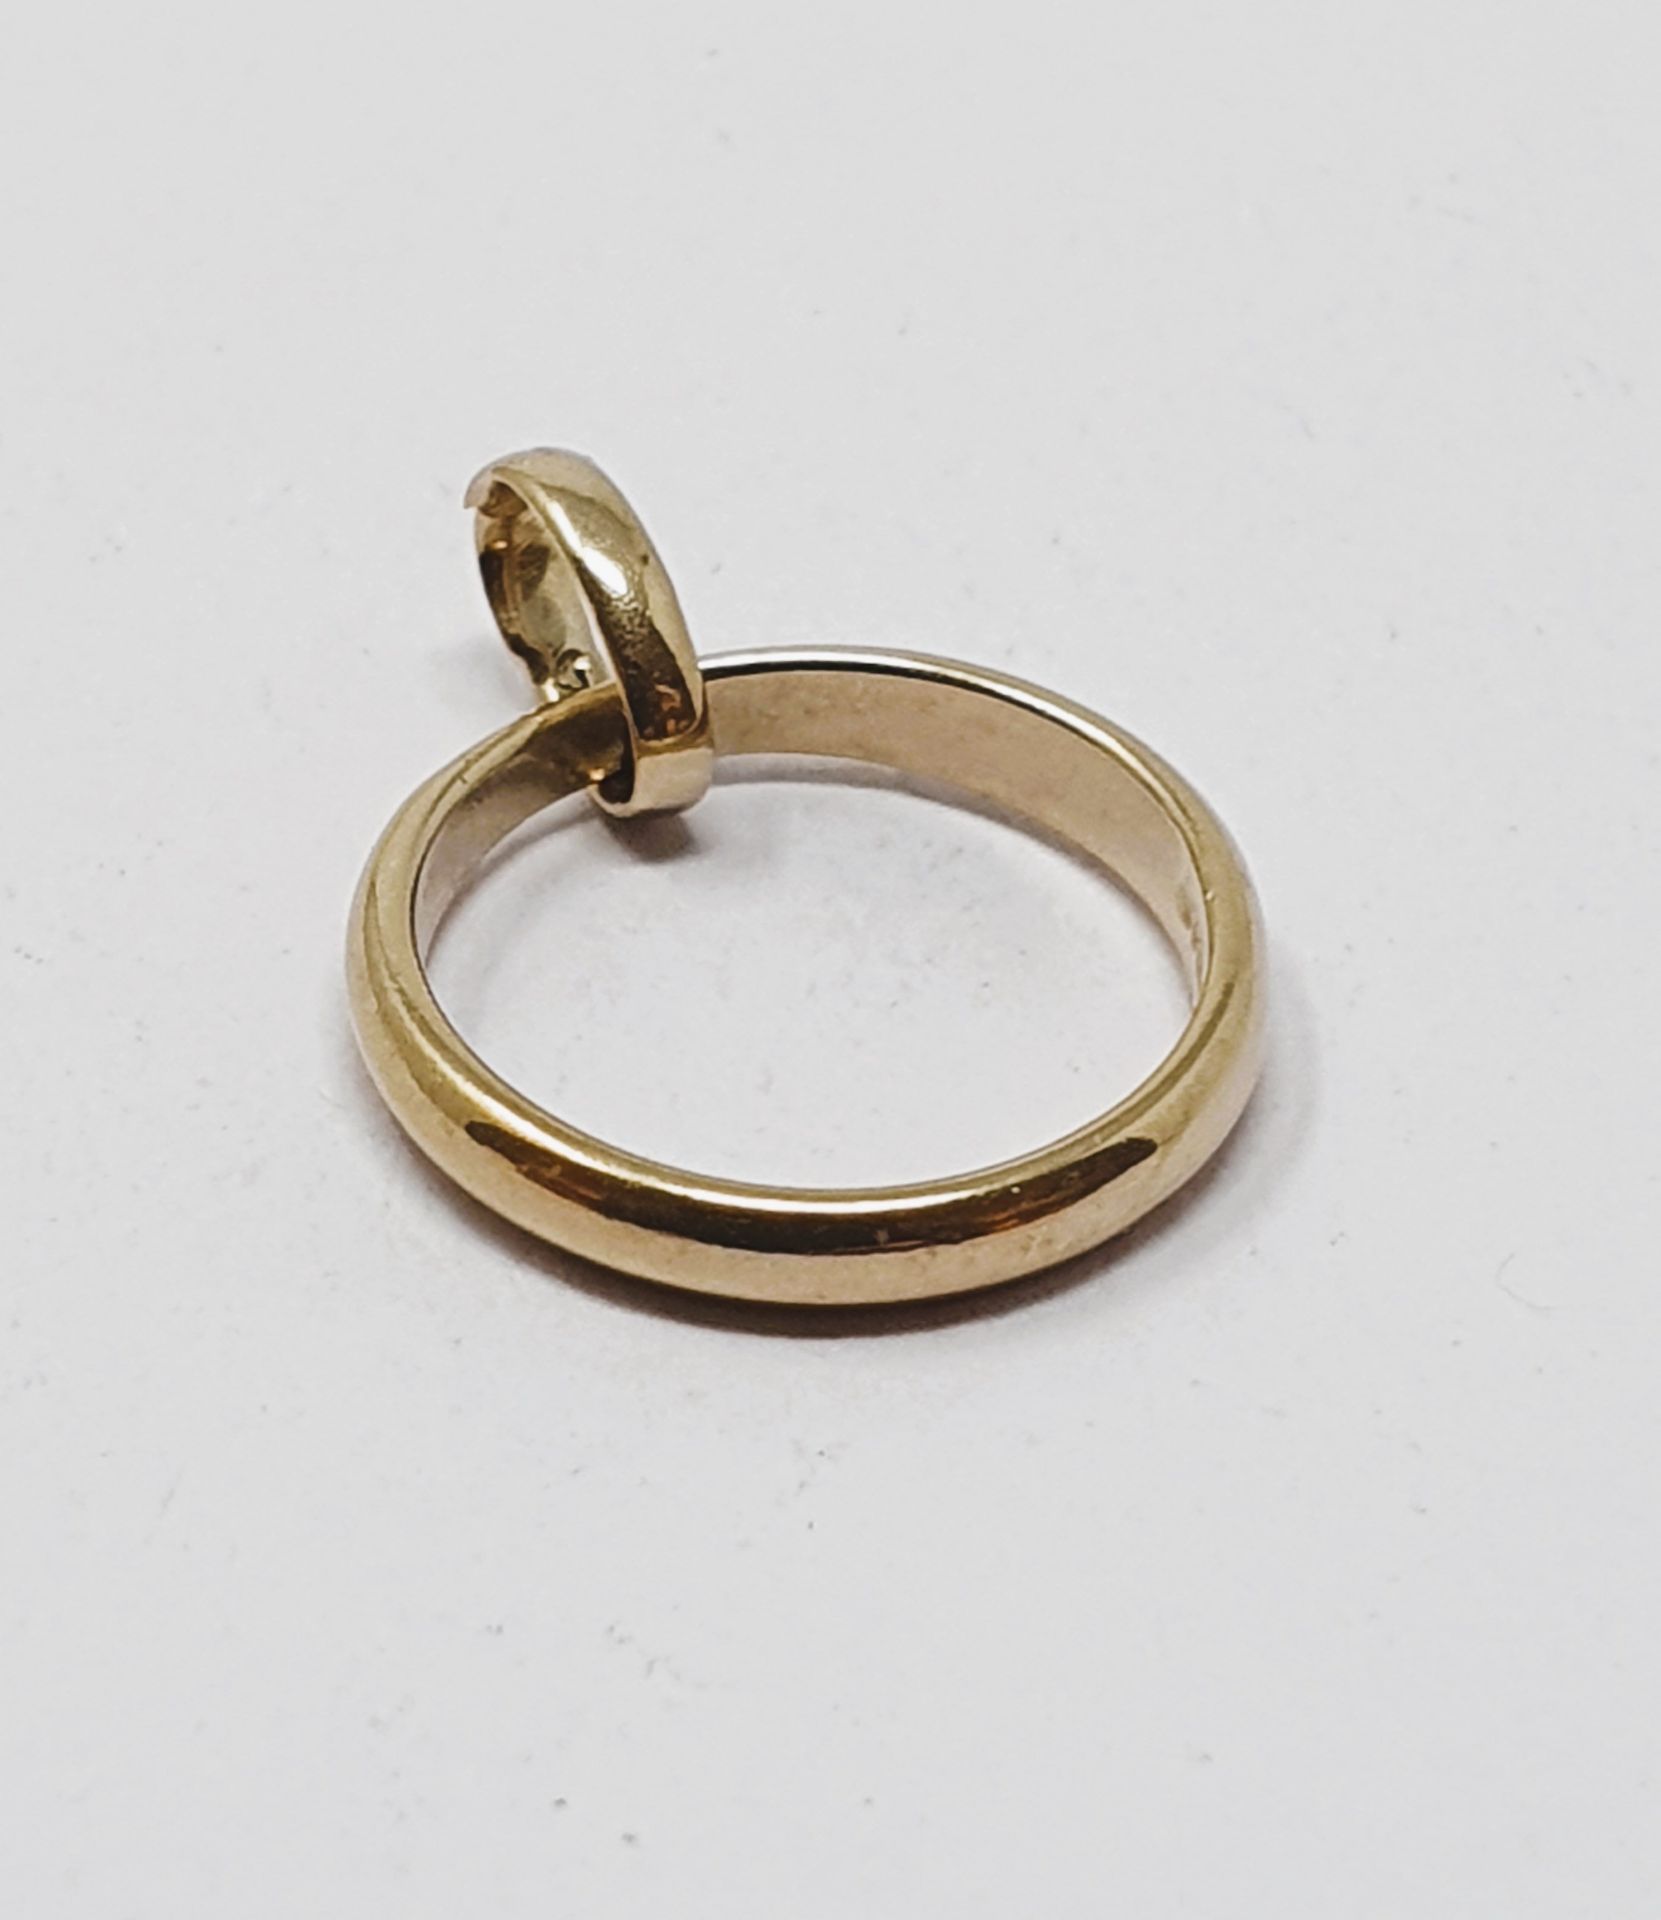 9ct gold vintage wedding ring charm, gross weight 0.